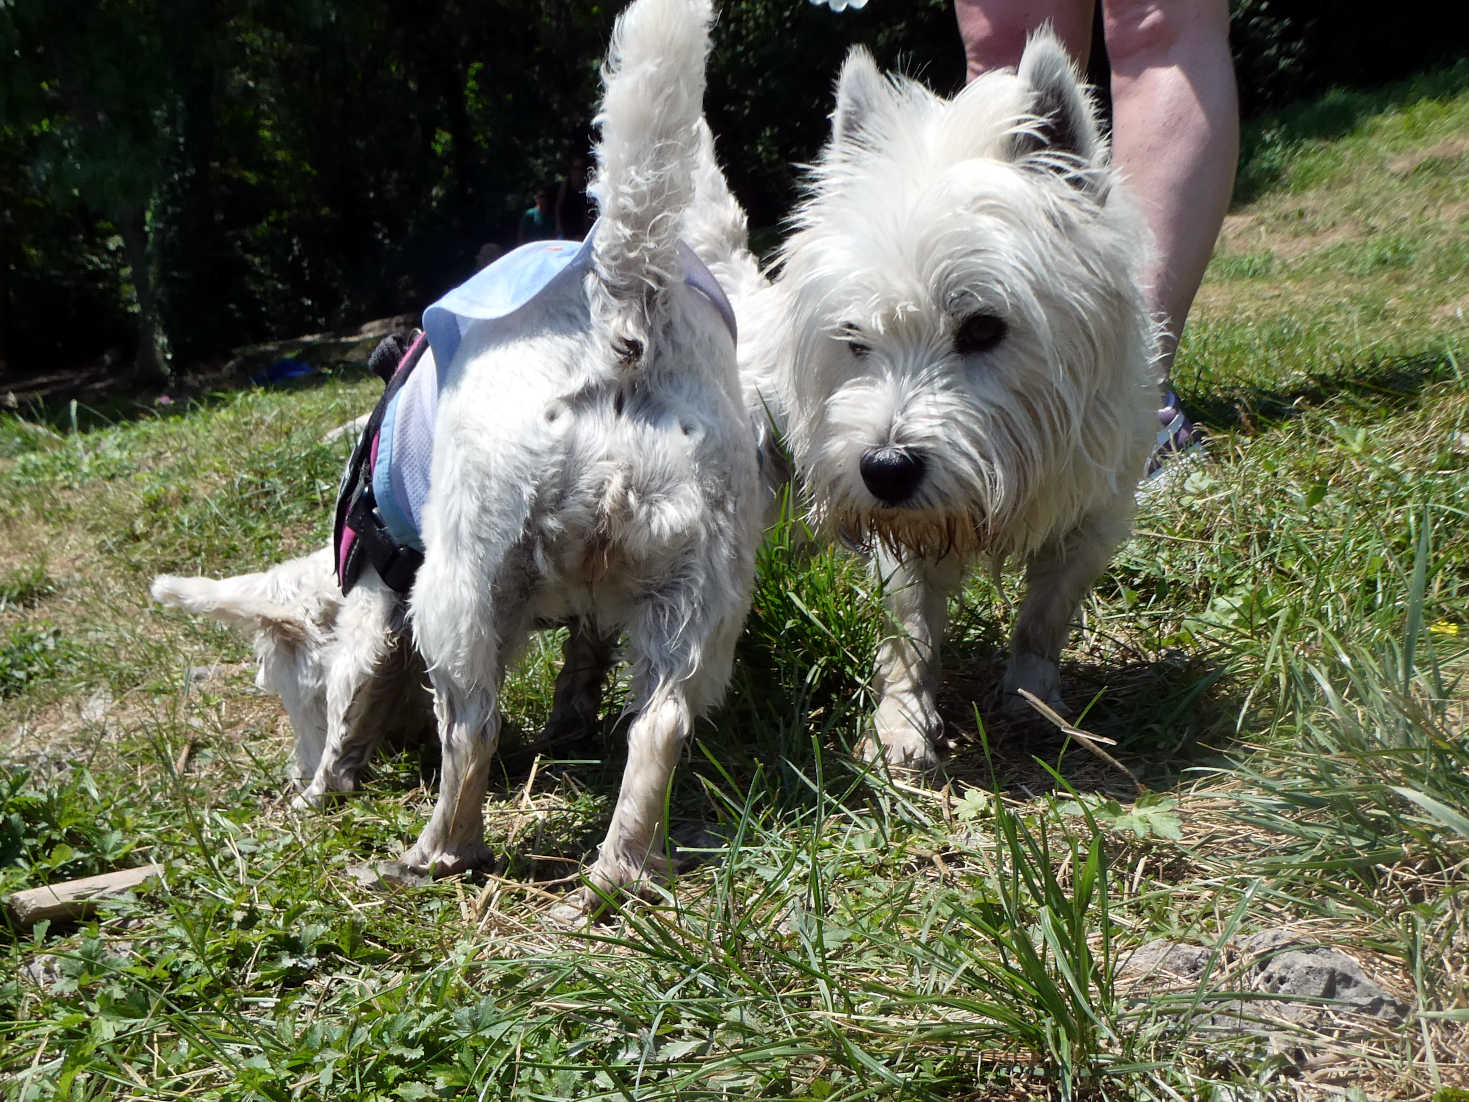 Poppy the westie and cousin from Ledro